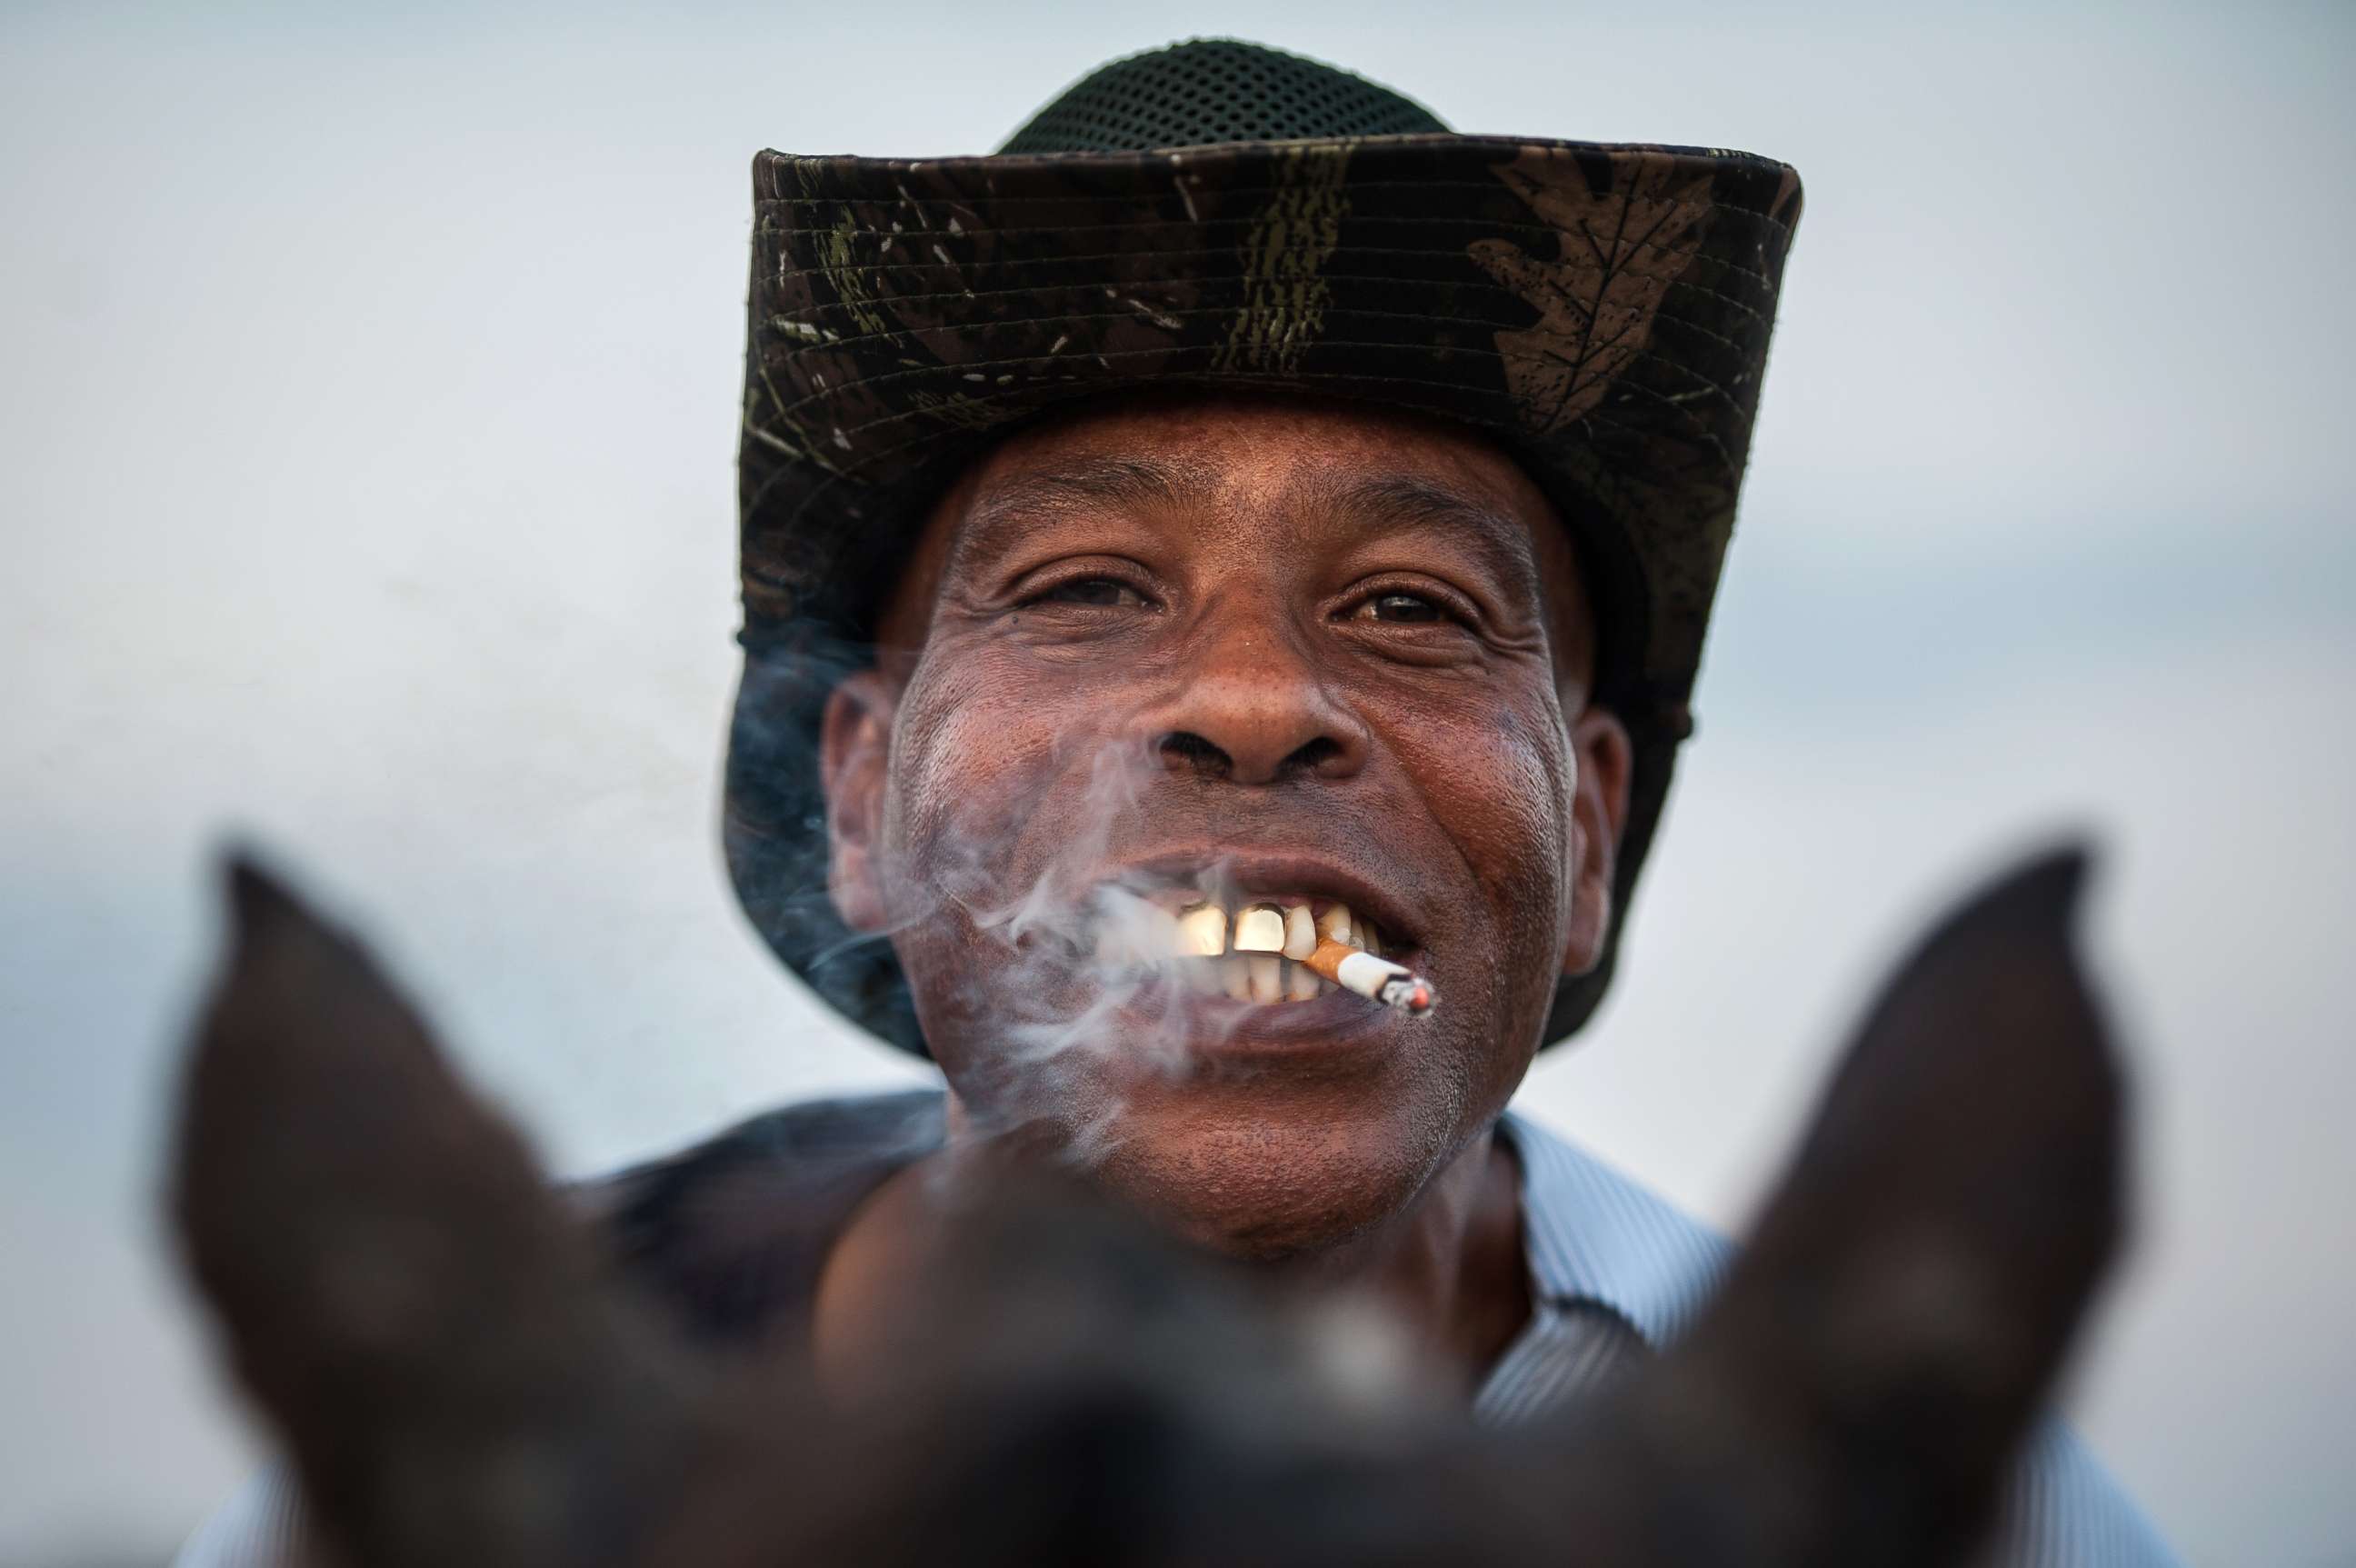 PHOTO: A cowboy named James shows off his golden grill while smoking a cigarette in Bolivar County, Miss.